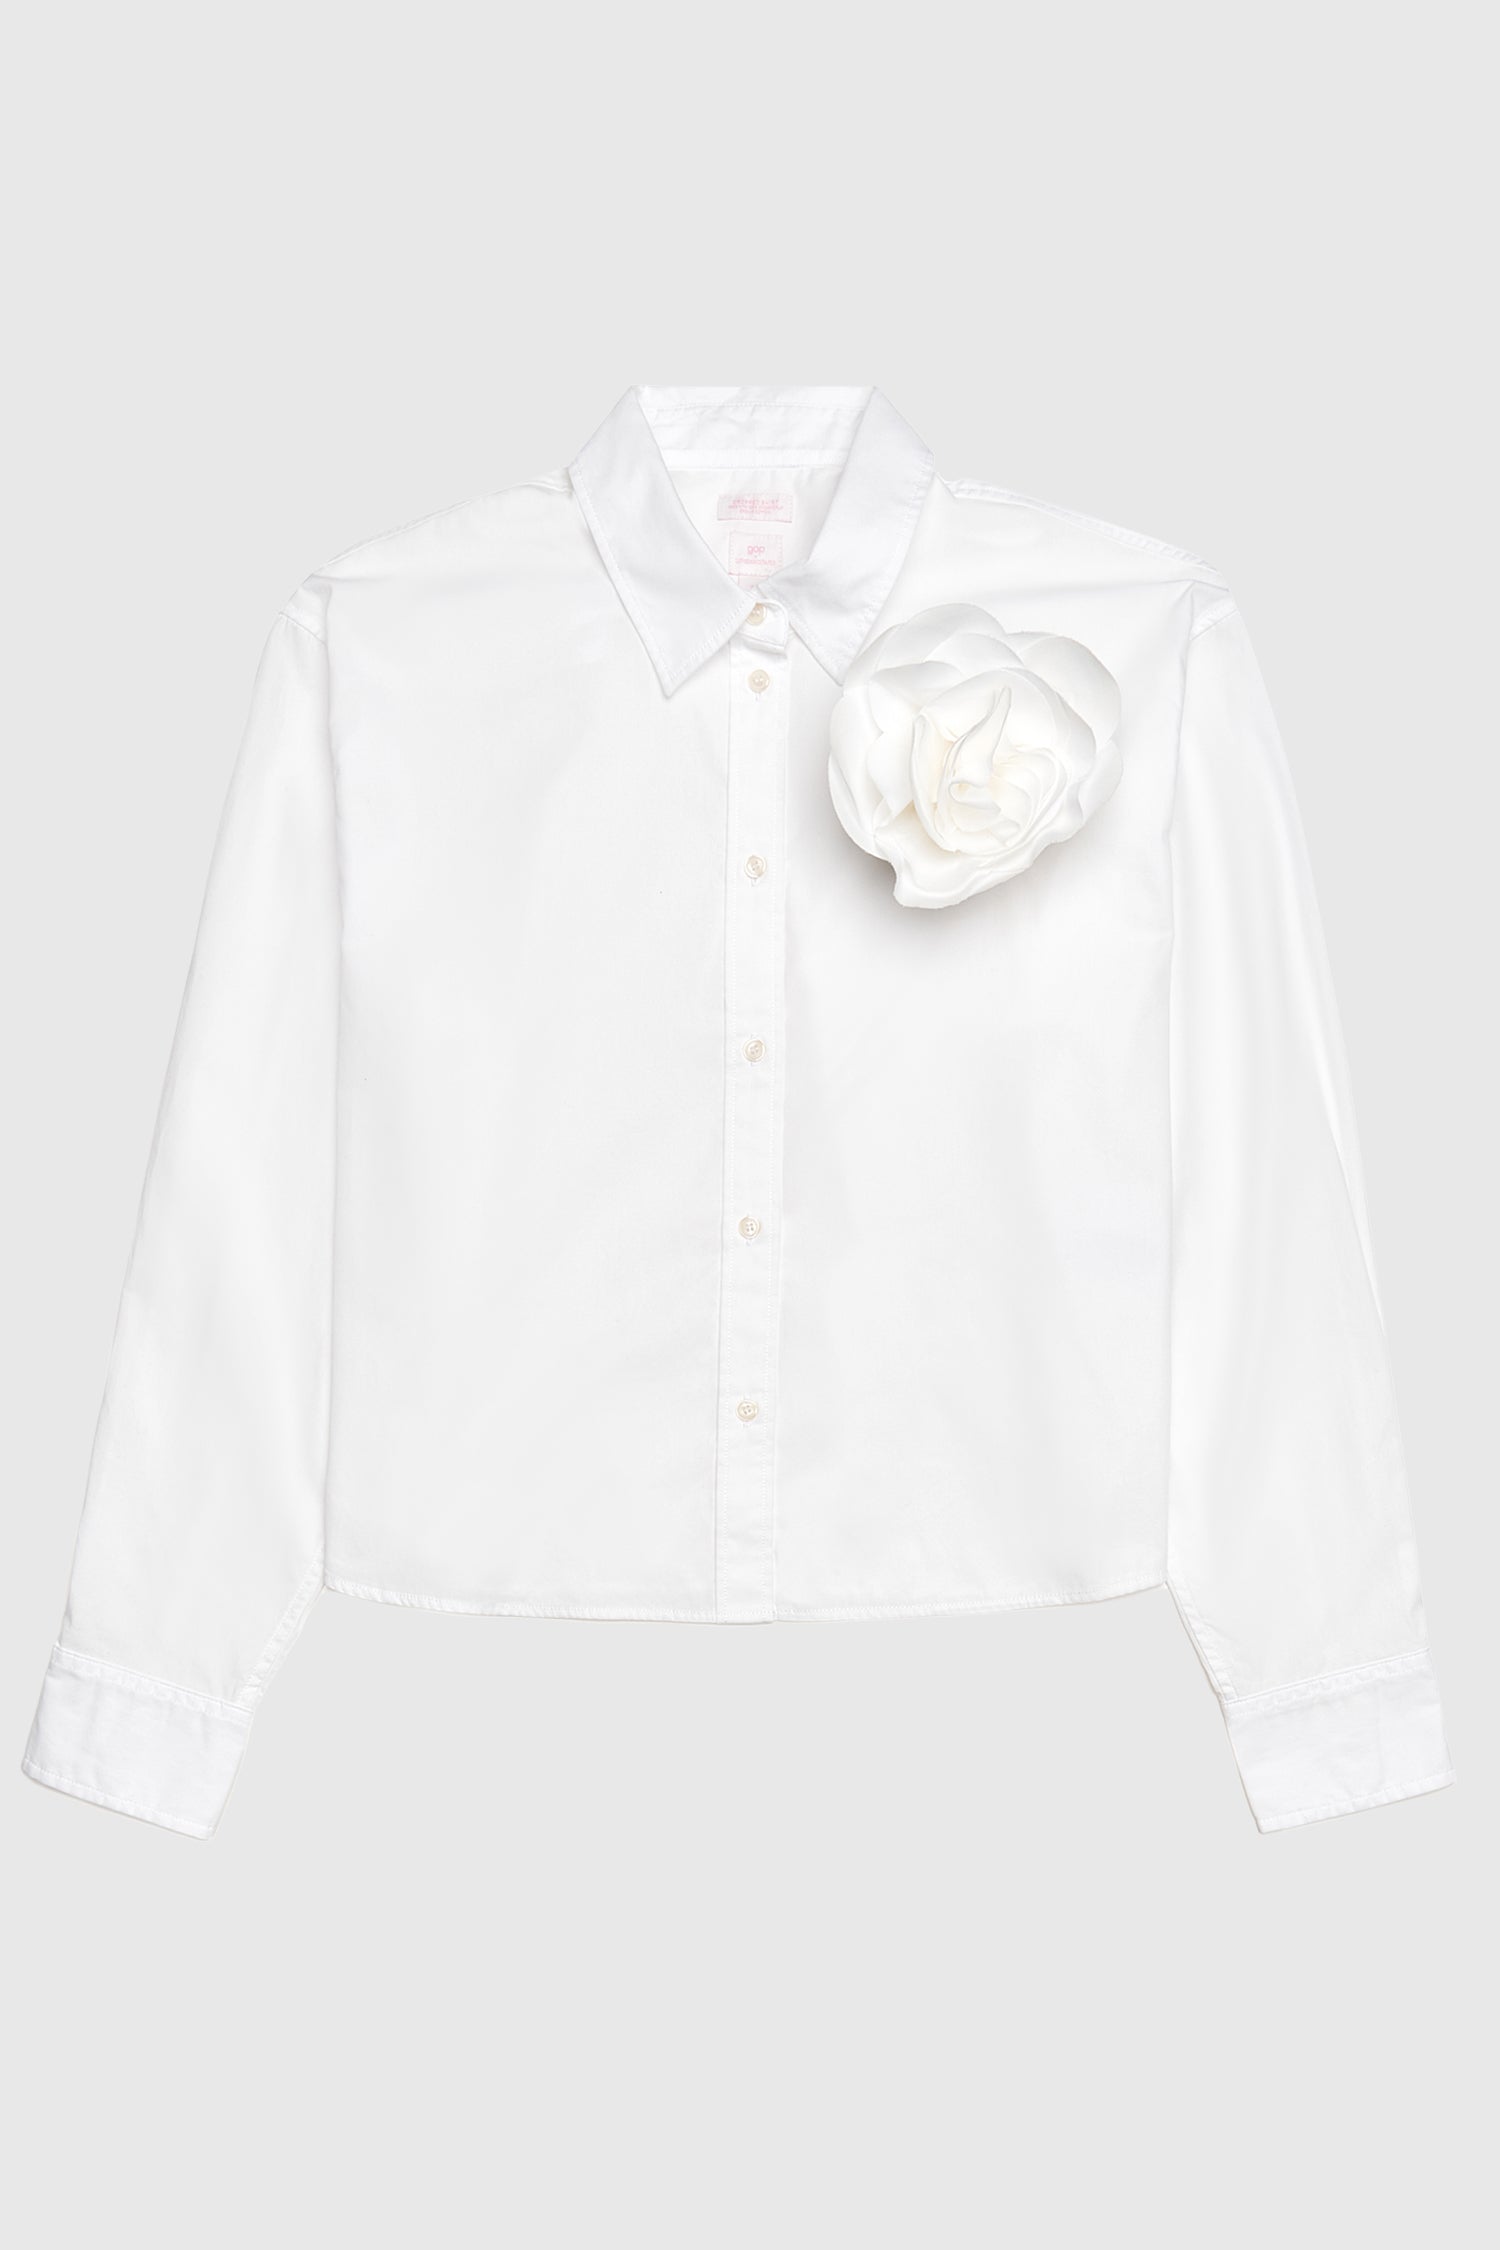 Image of white collared crop shirt with rosette detail on shoulder